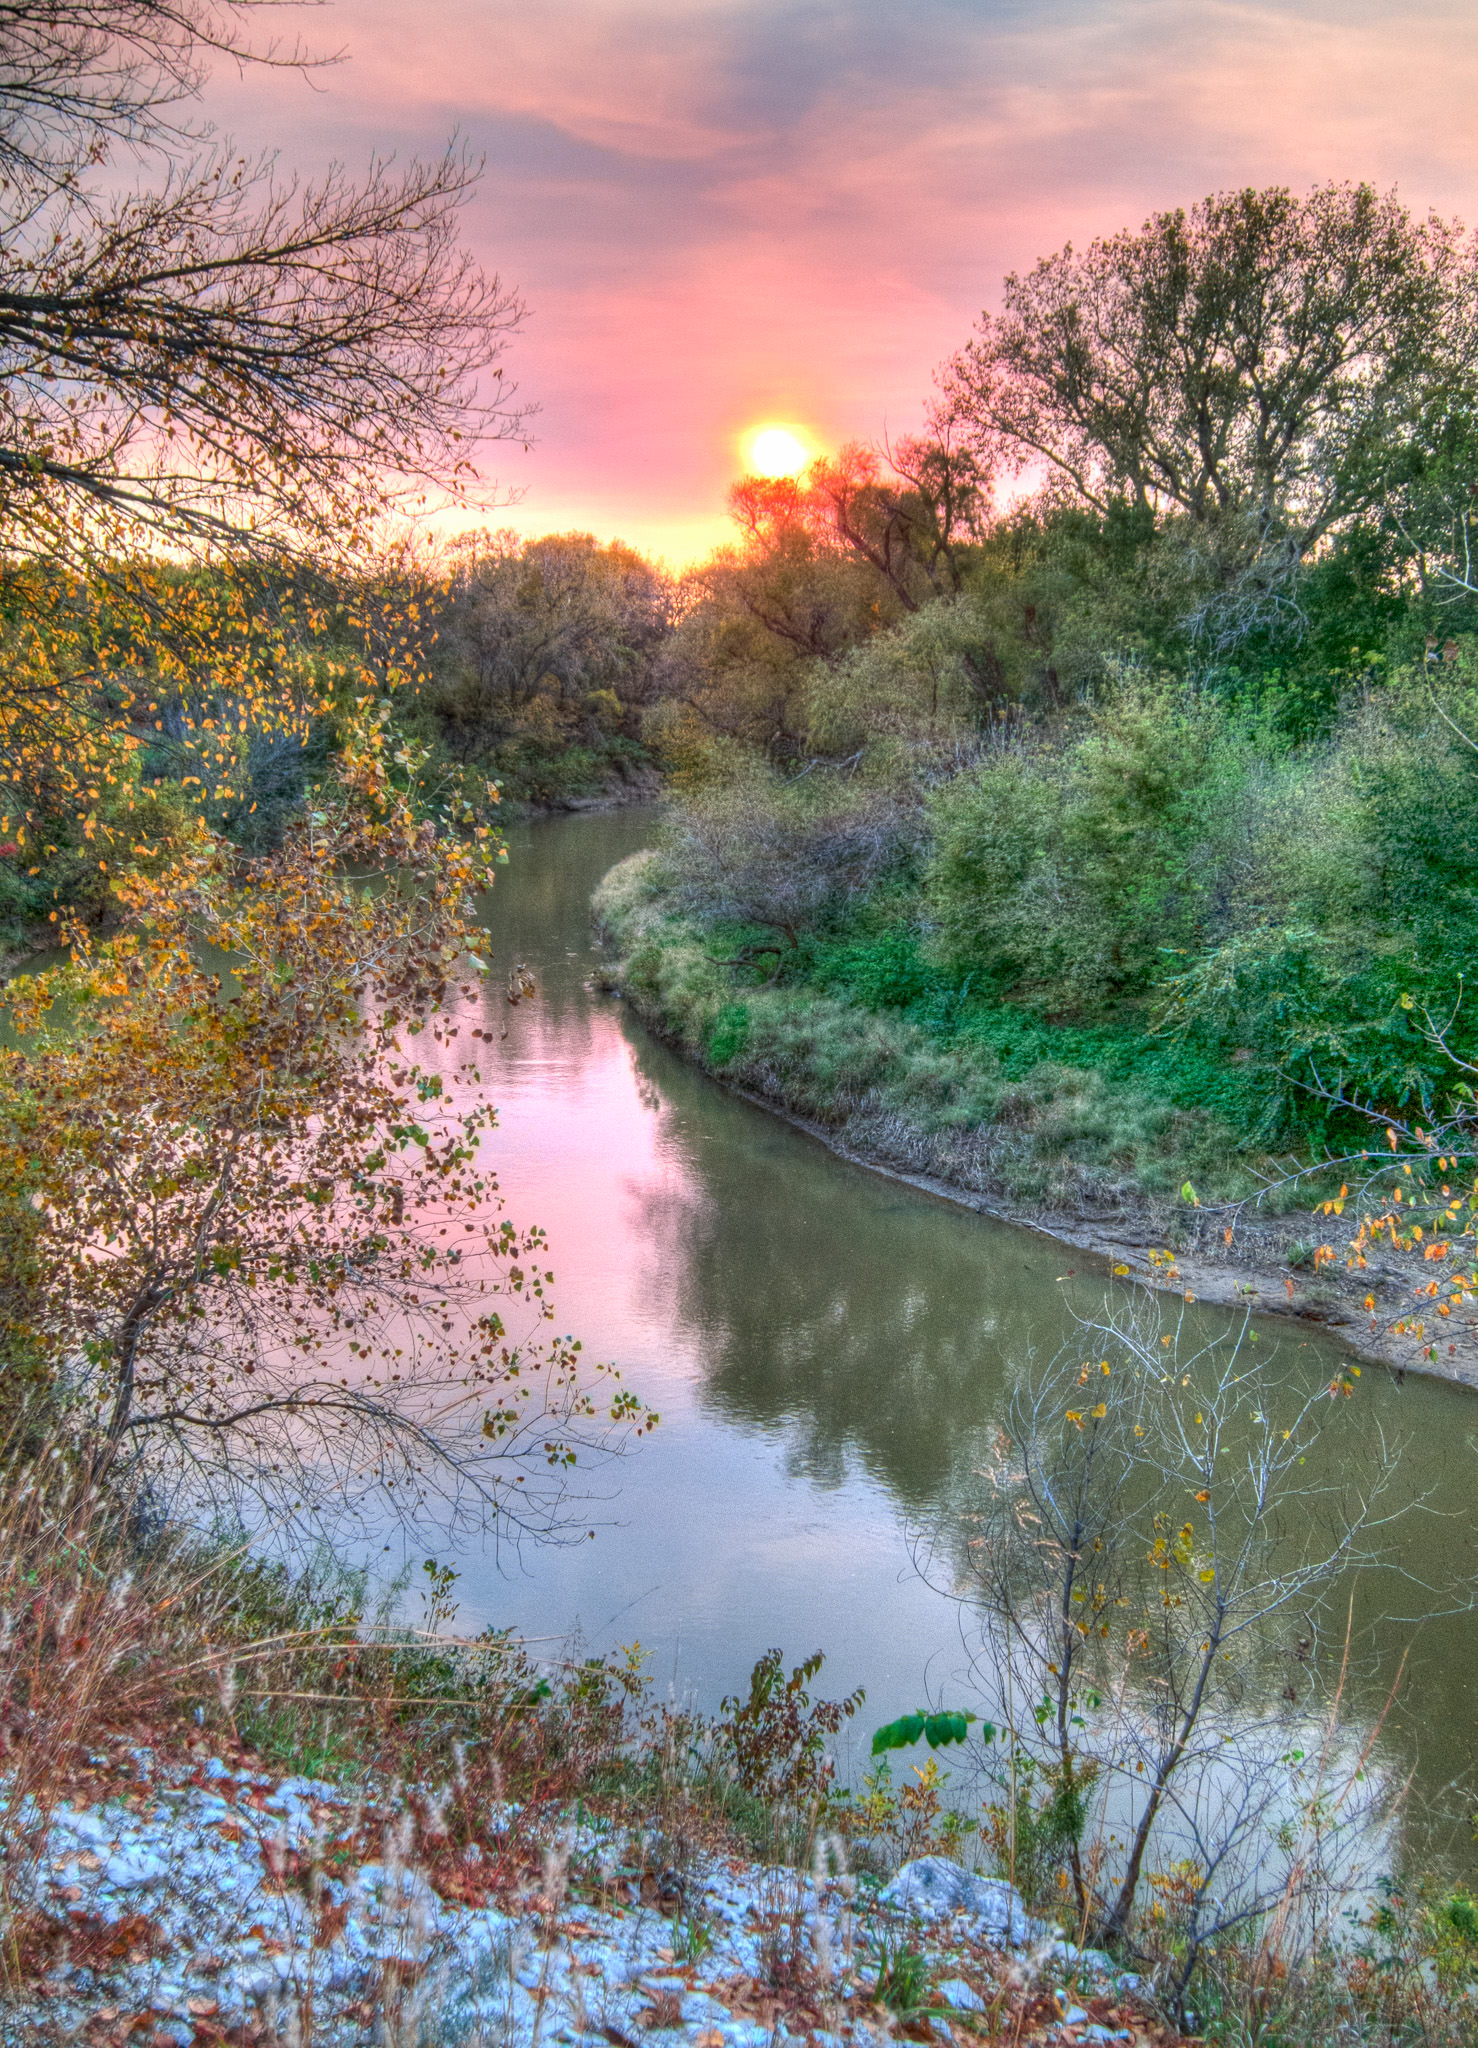 Sunset on the Smoky Hill River